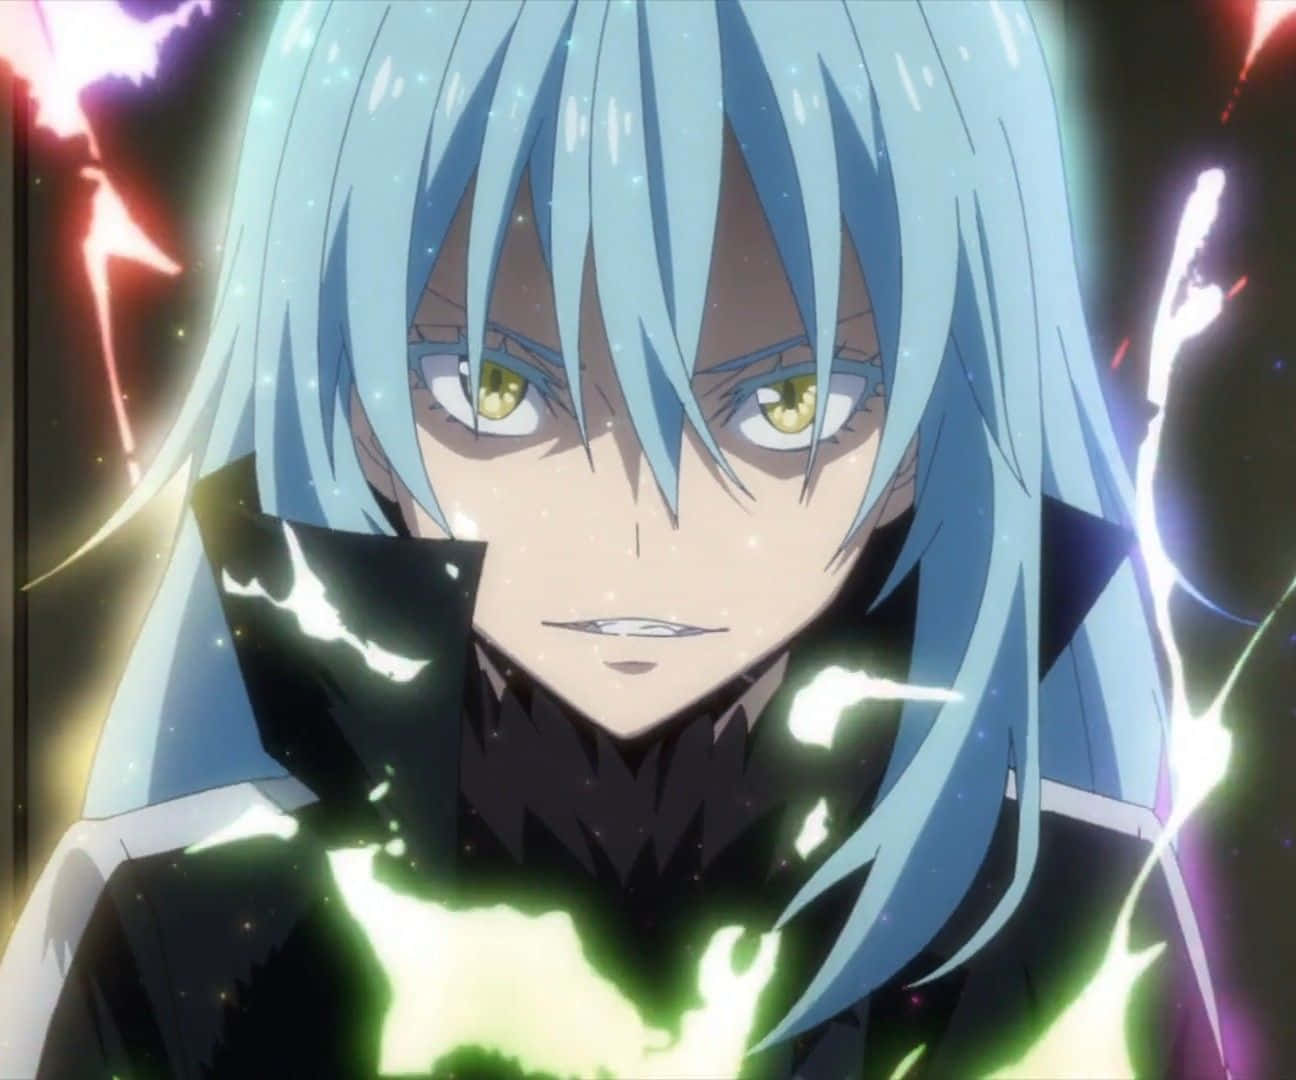 Angry Rimuru Pfp With Glowing Lights Background